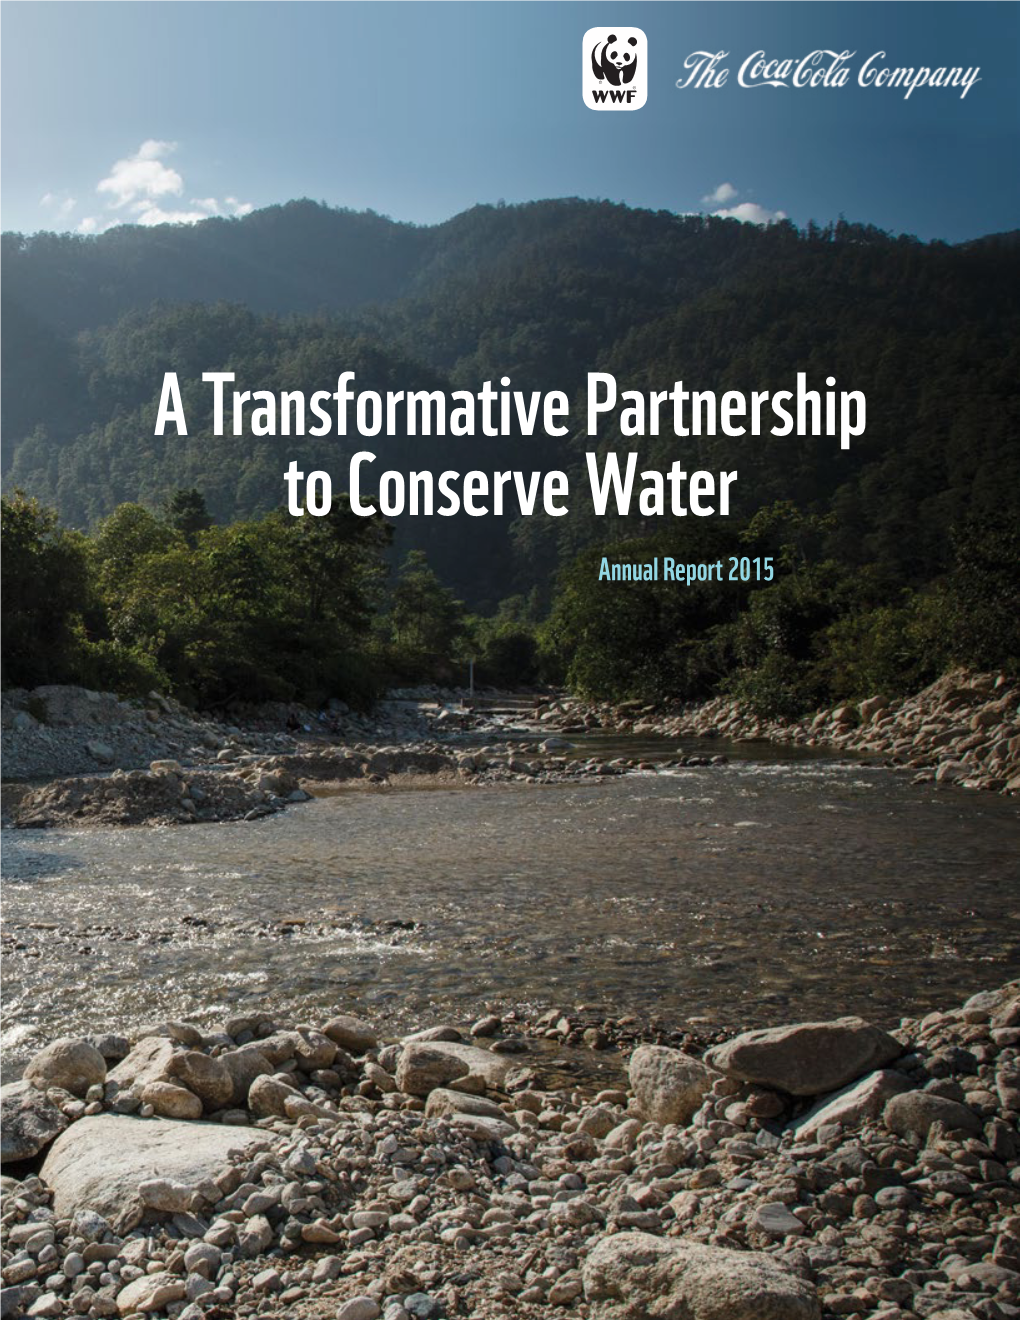 A Transformative Partnership to Conserve Water